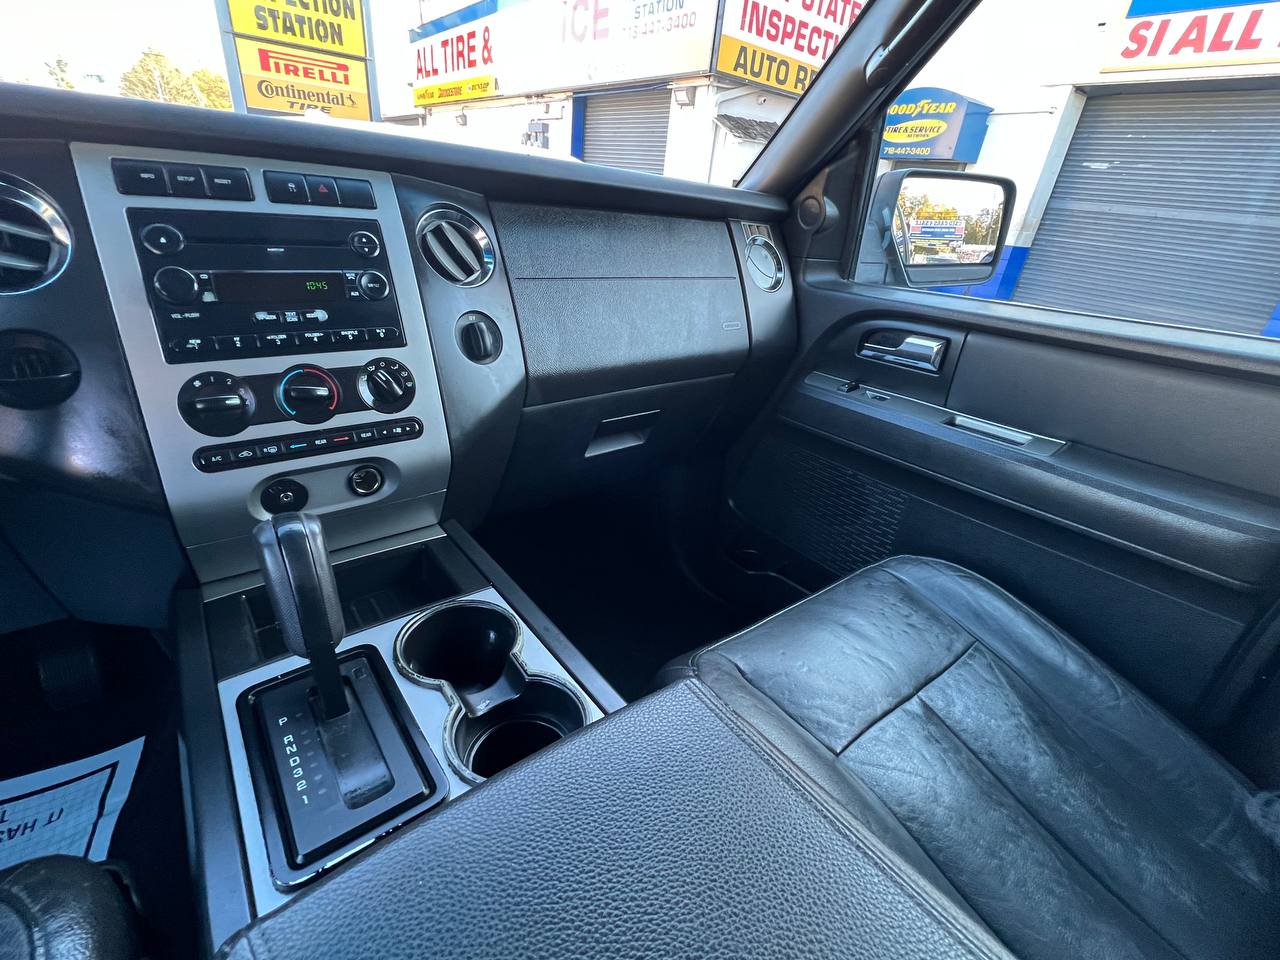 Used - Ford Expedition EL XLT  for sale in Staten Island NY